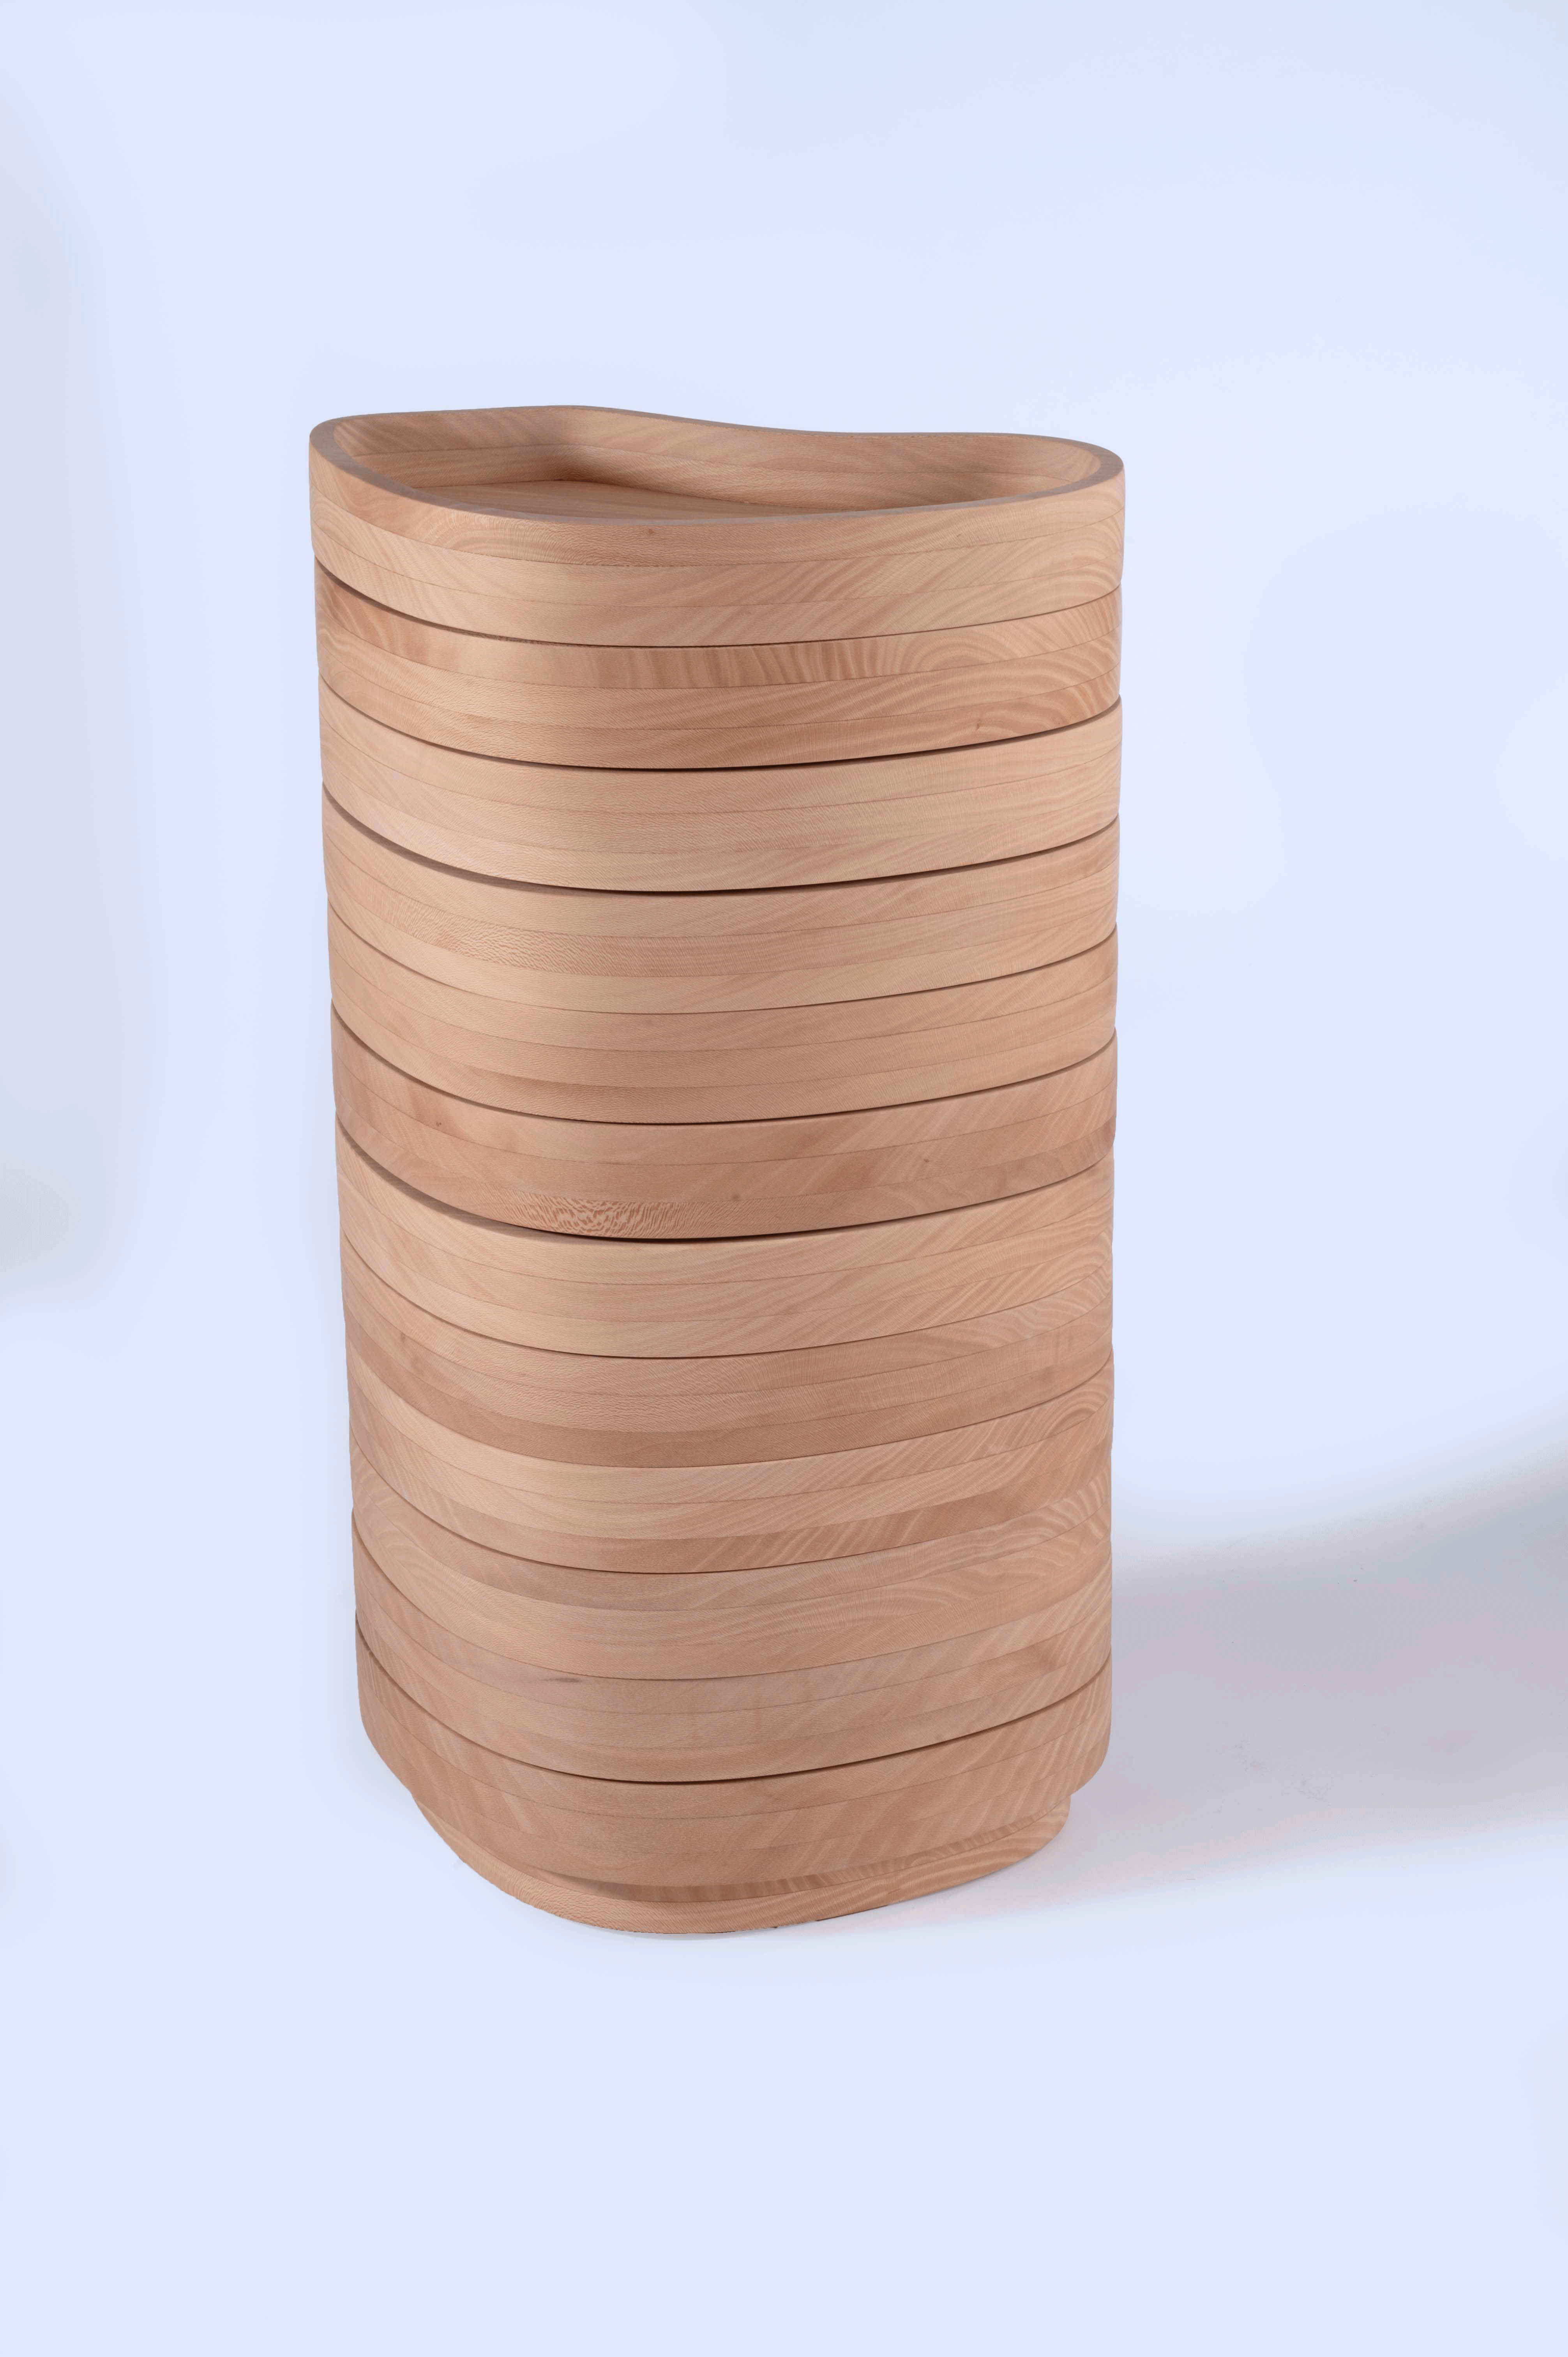 A stack of rotating wooden trays with organic, curved shapes is arranged vertically